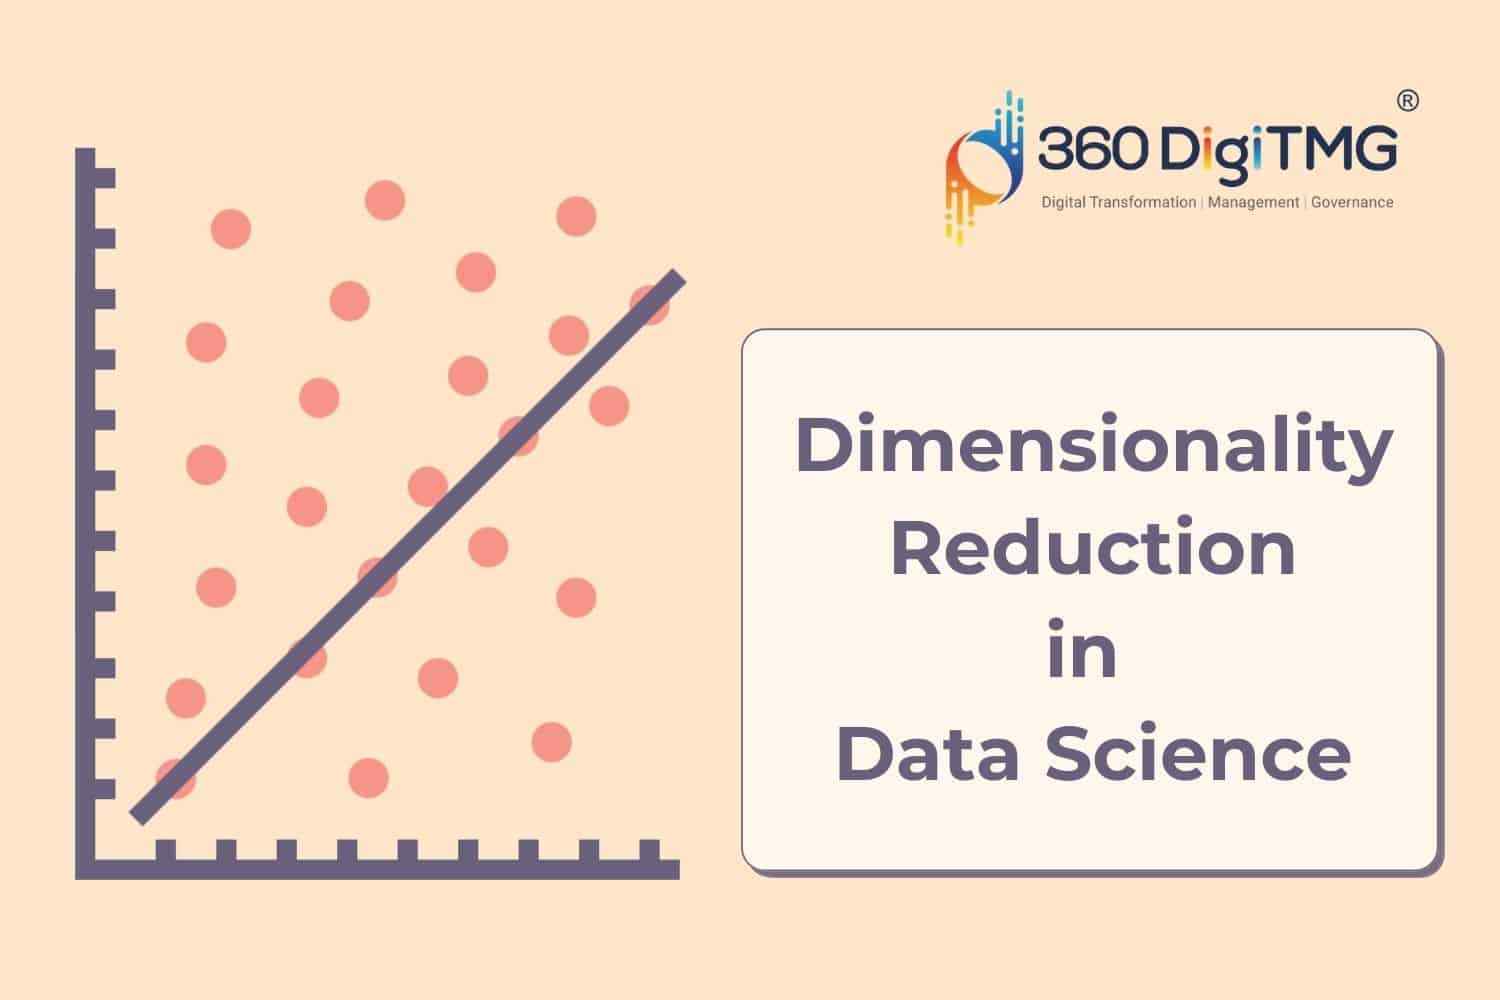 Dimensionality Reduction in Data Science